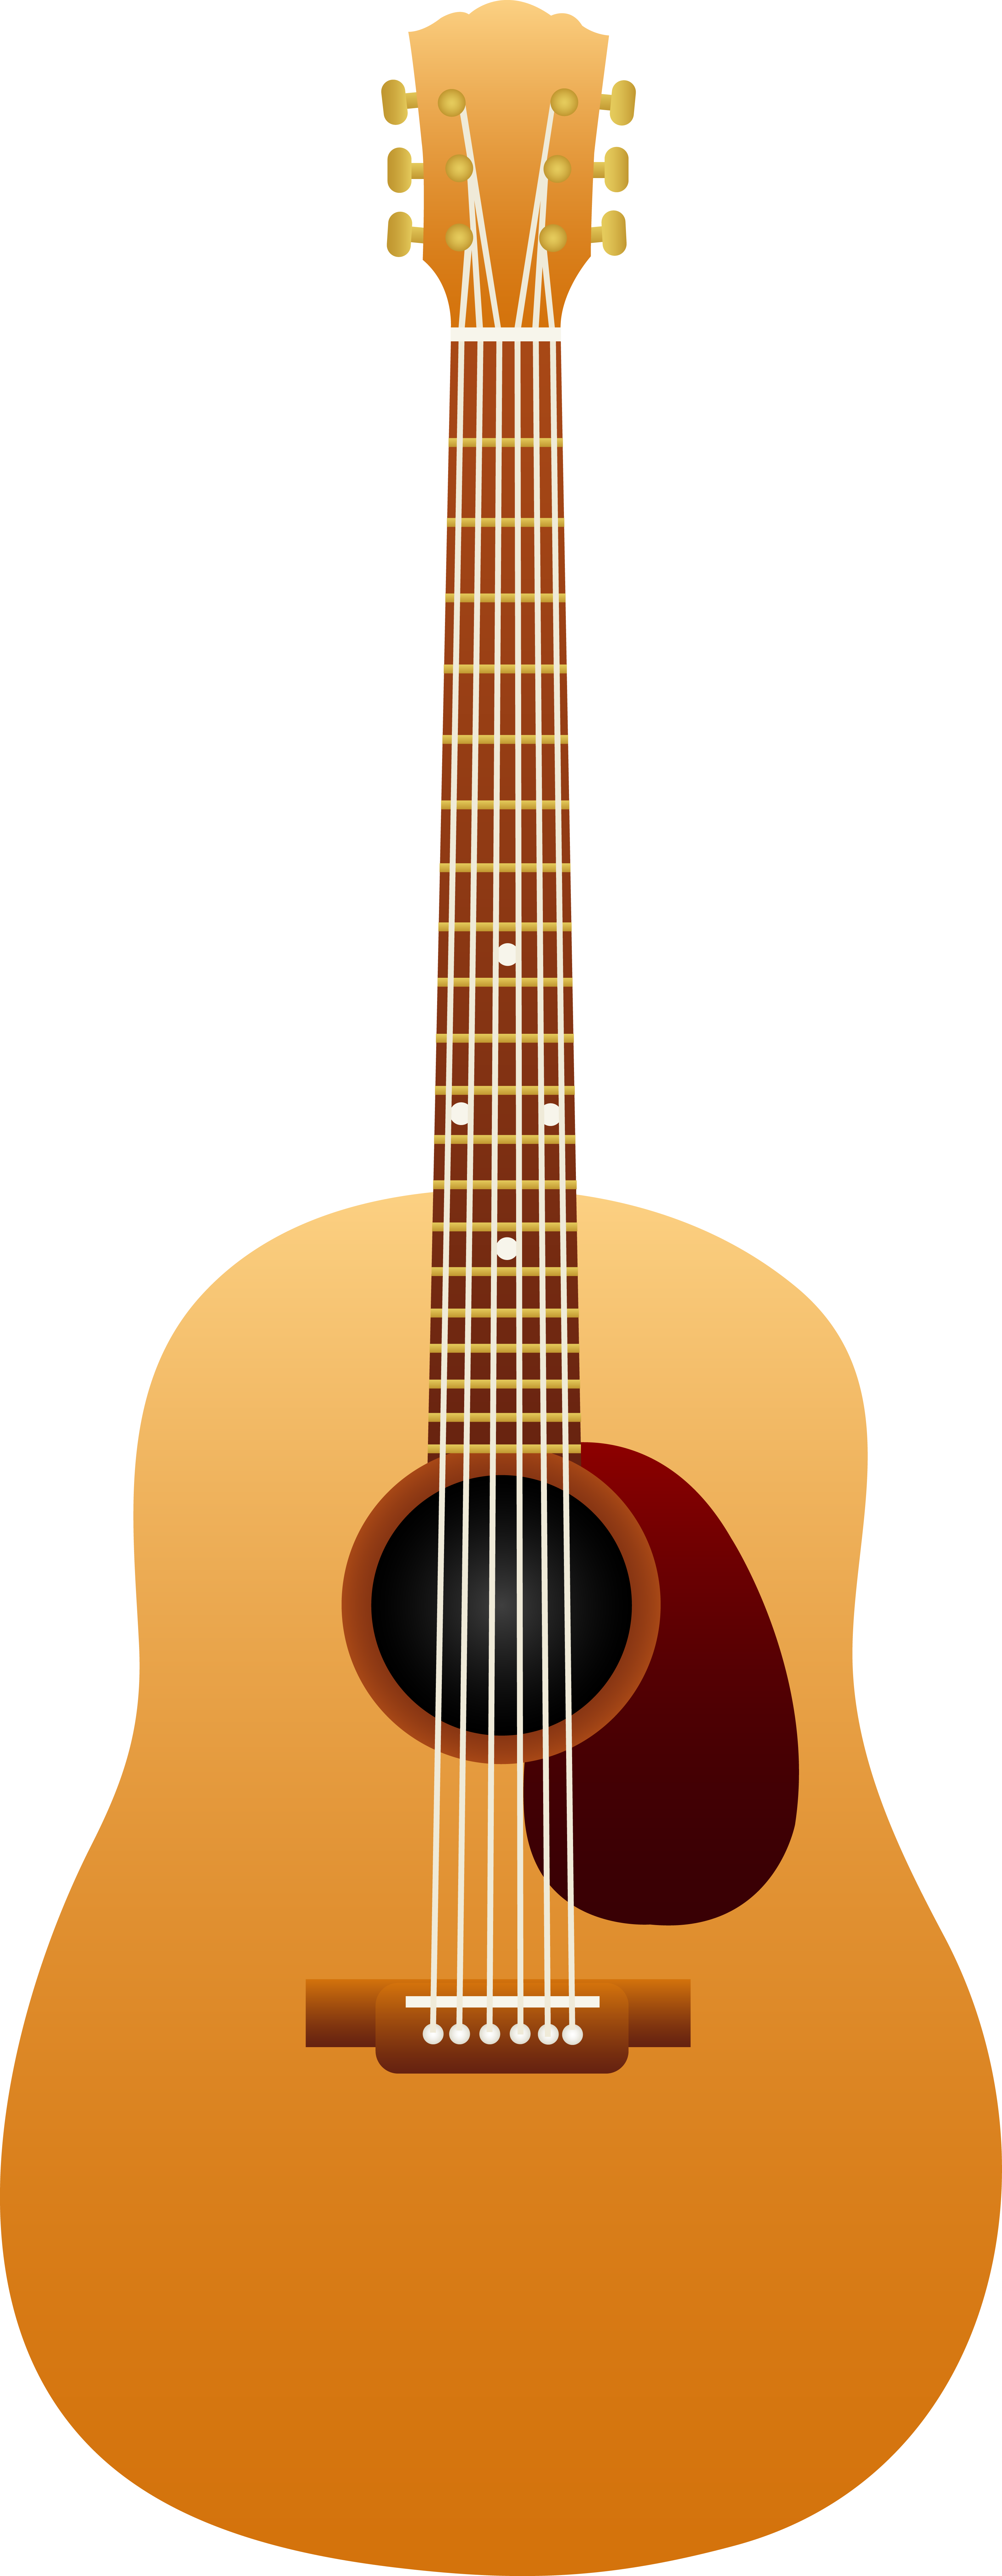 guitar clipart animated